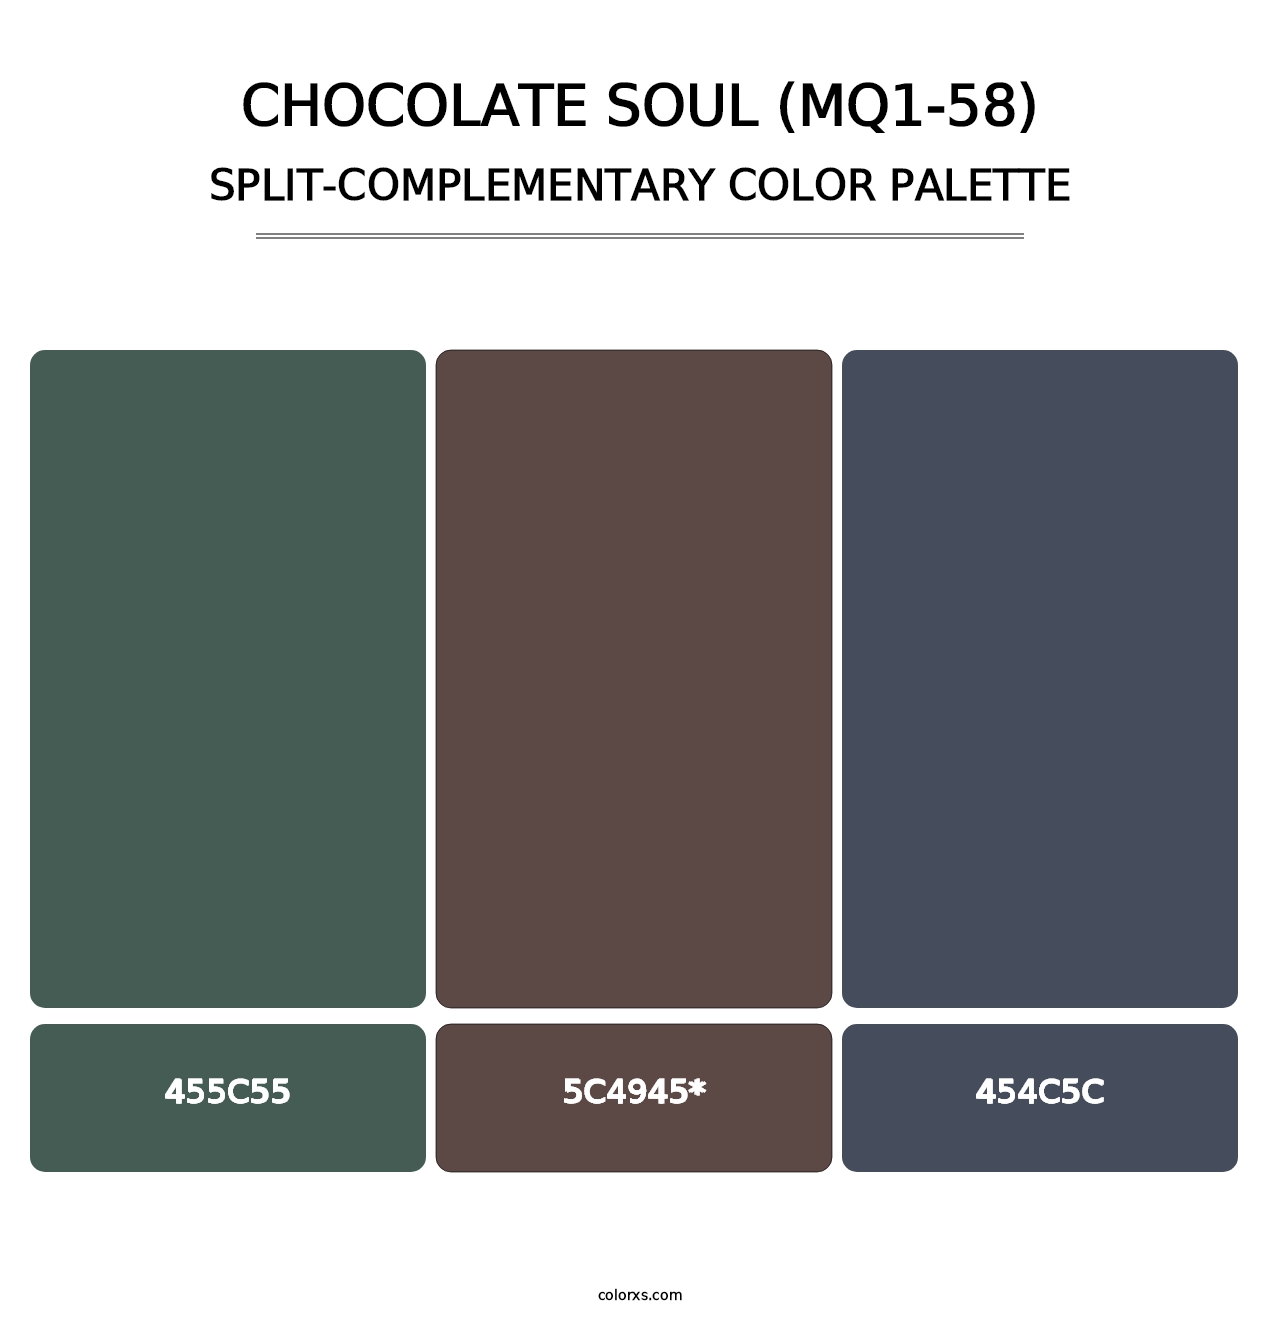 Chocolate Soul (MQ1-58) - Split-Complementary Color Palette